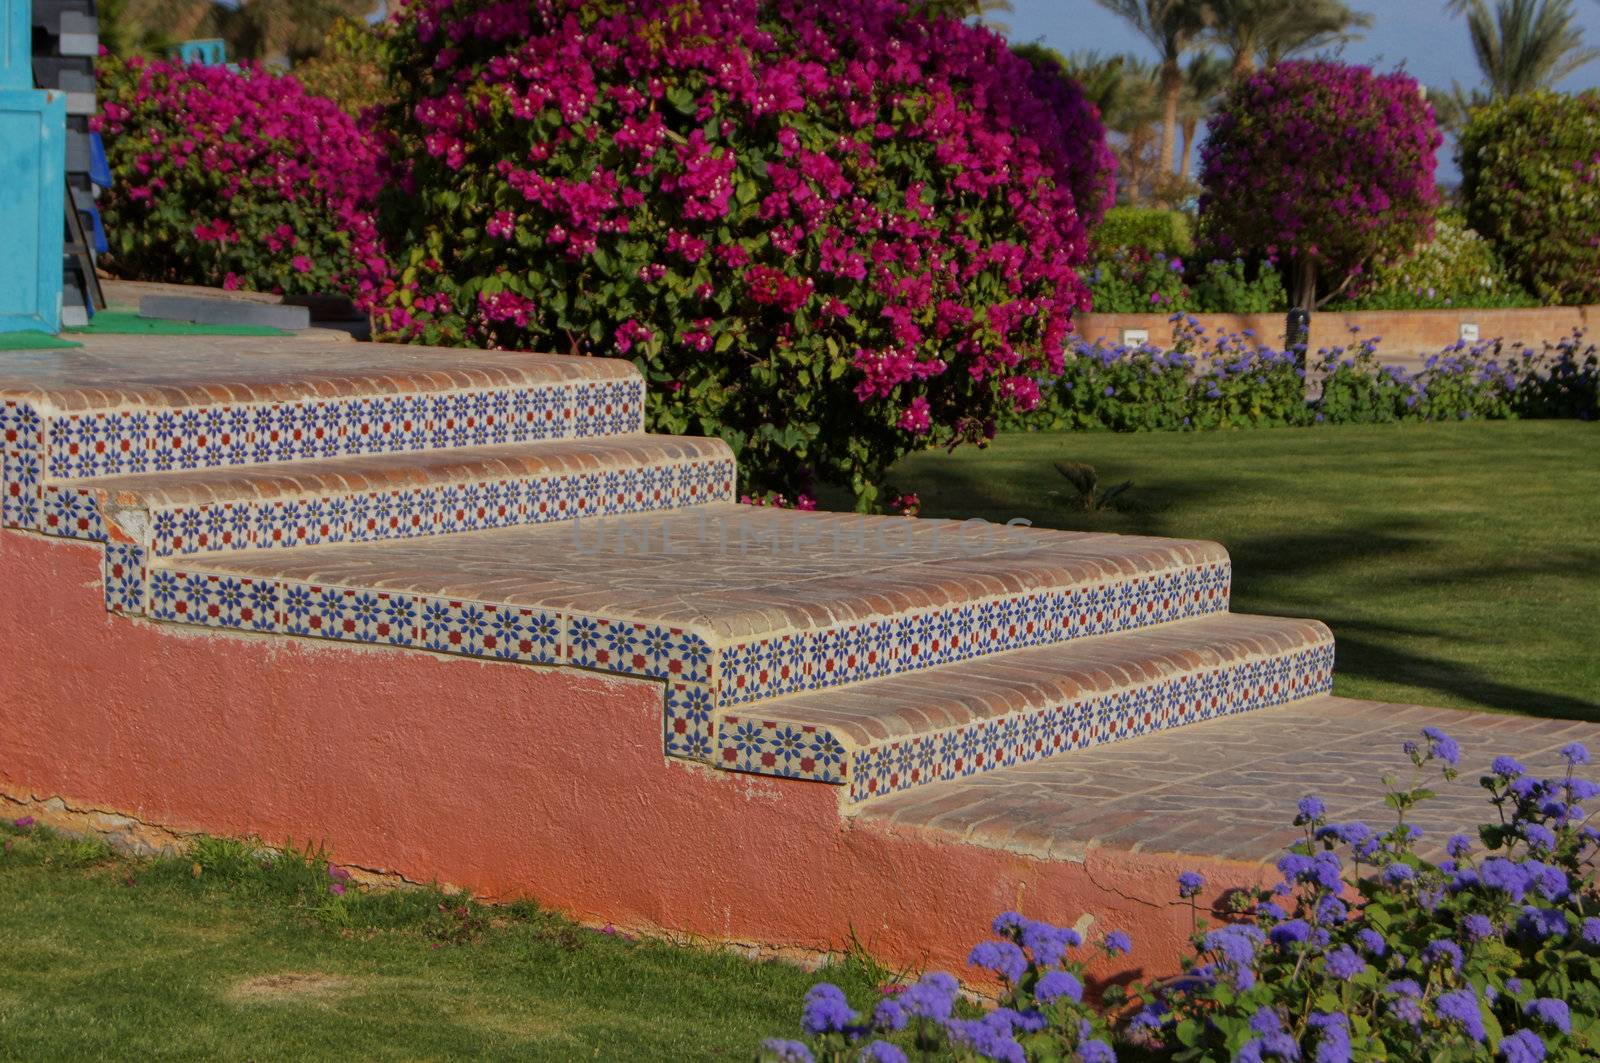 Courtyard of mediterranean villa with ceramic tile walkway and blooming bushes in Egypt 
  